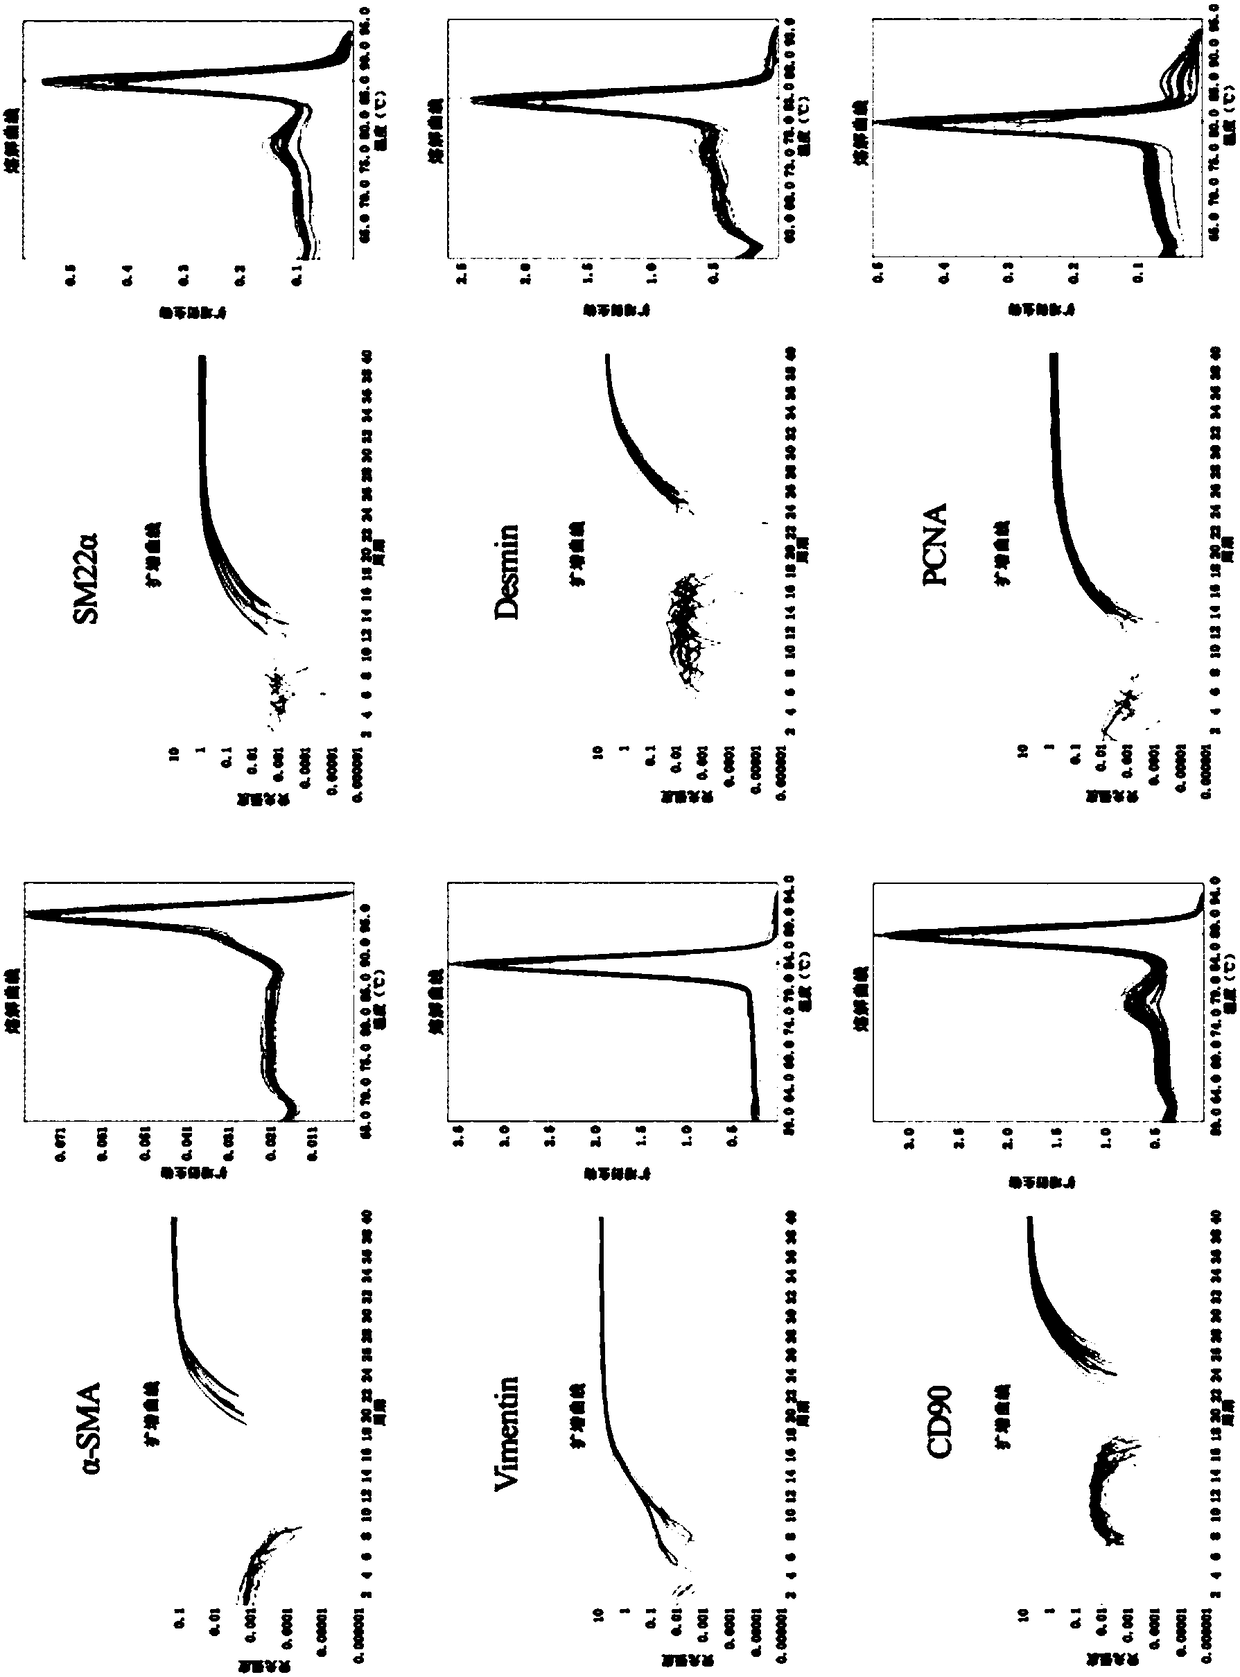 Primary culture and identification methods for smooth muscle cells of esophagogastric junction via enzyme digestion method